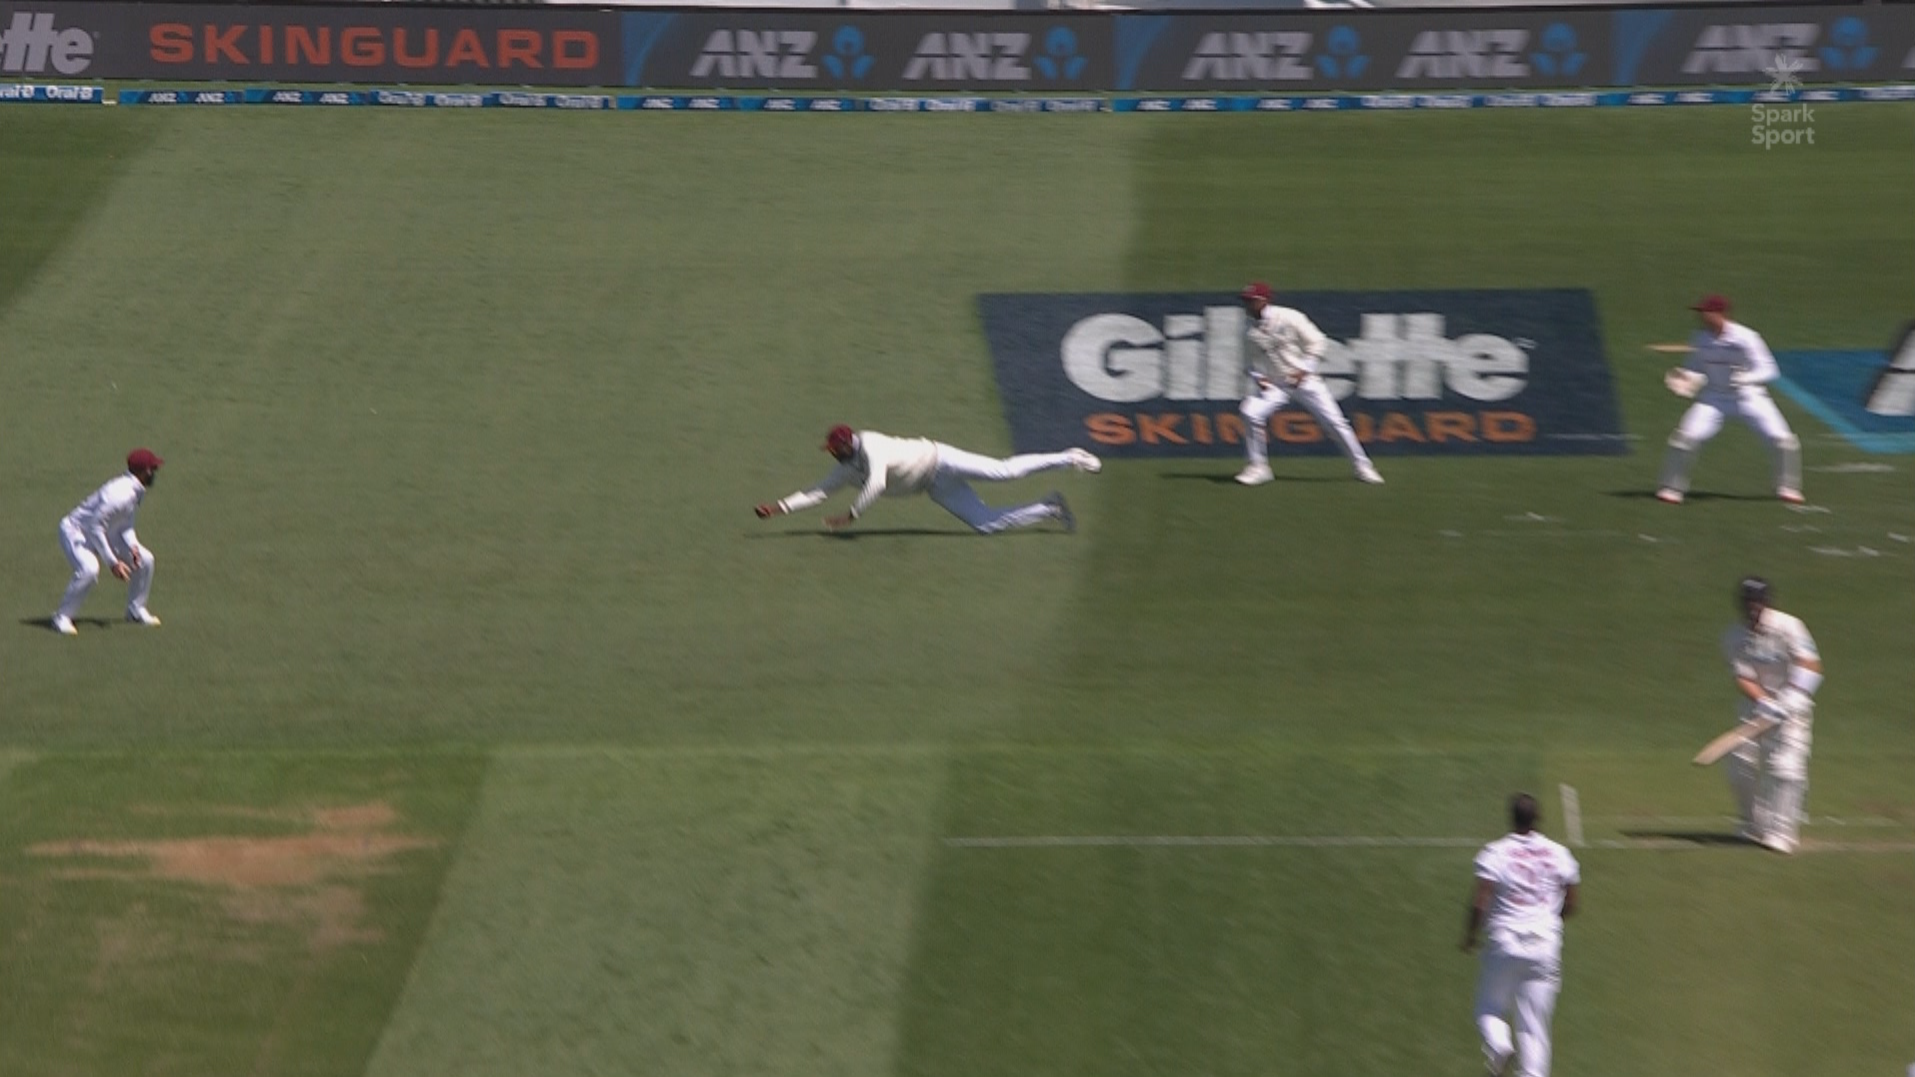 NZ v WI 2020: WATCH – Jason Holder plucks a stunner at second slip to dismiss Will Young